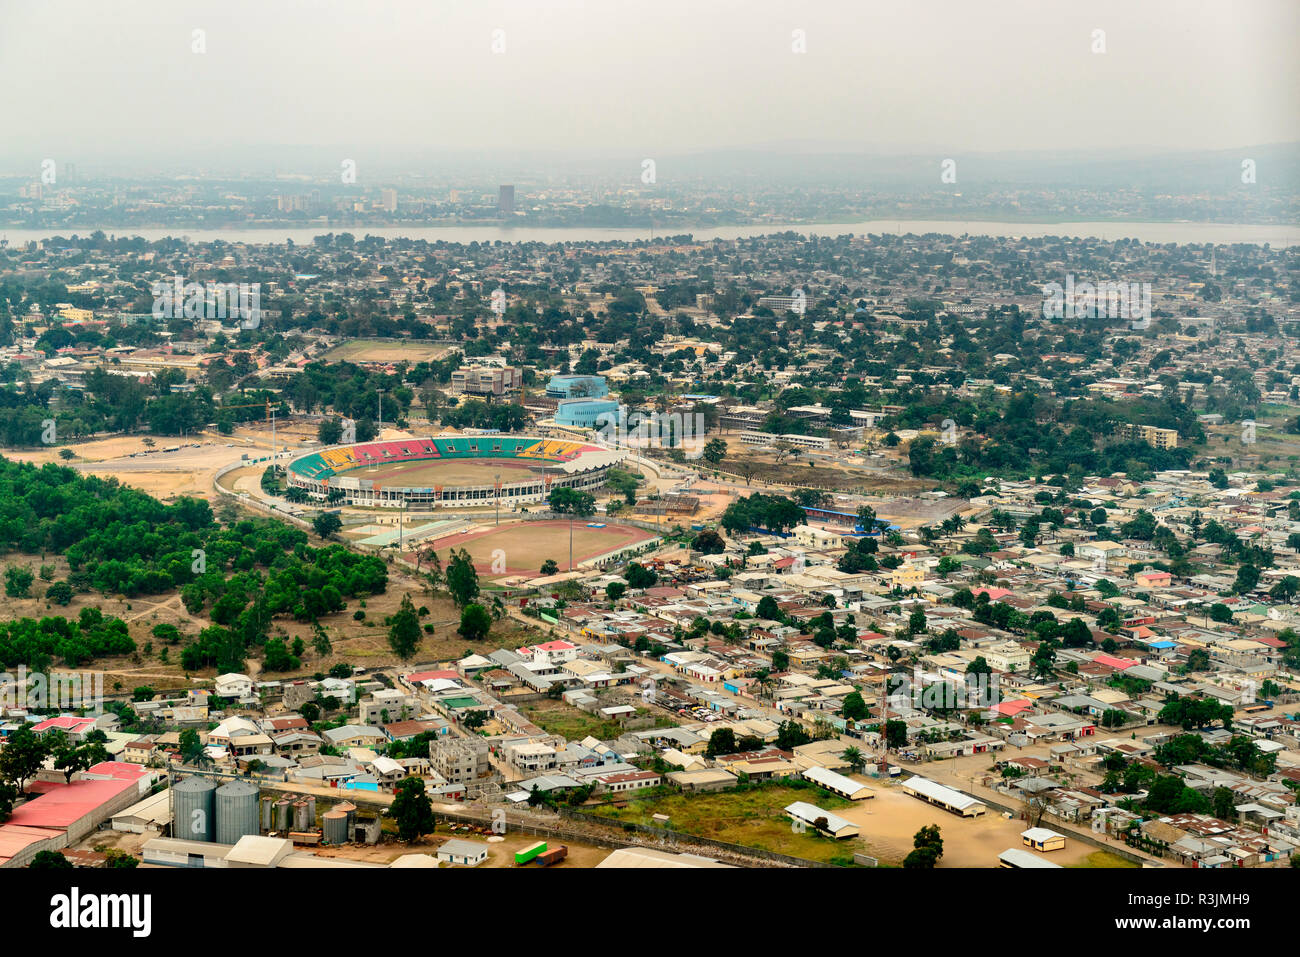 Aerial vide of Brazzaville with the Congo River and Kinshasa, Capital of Democratic Republic of the Congo in the background. Republic of the Congo Stock Photo